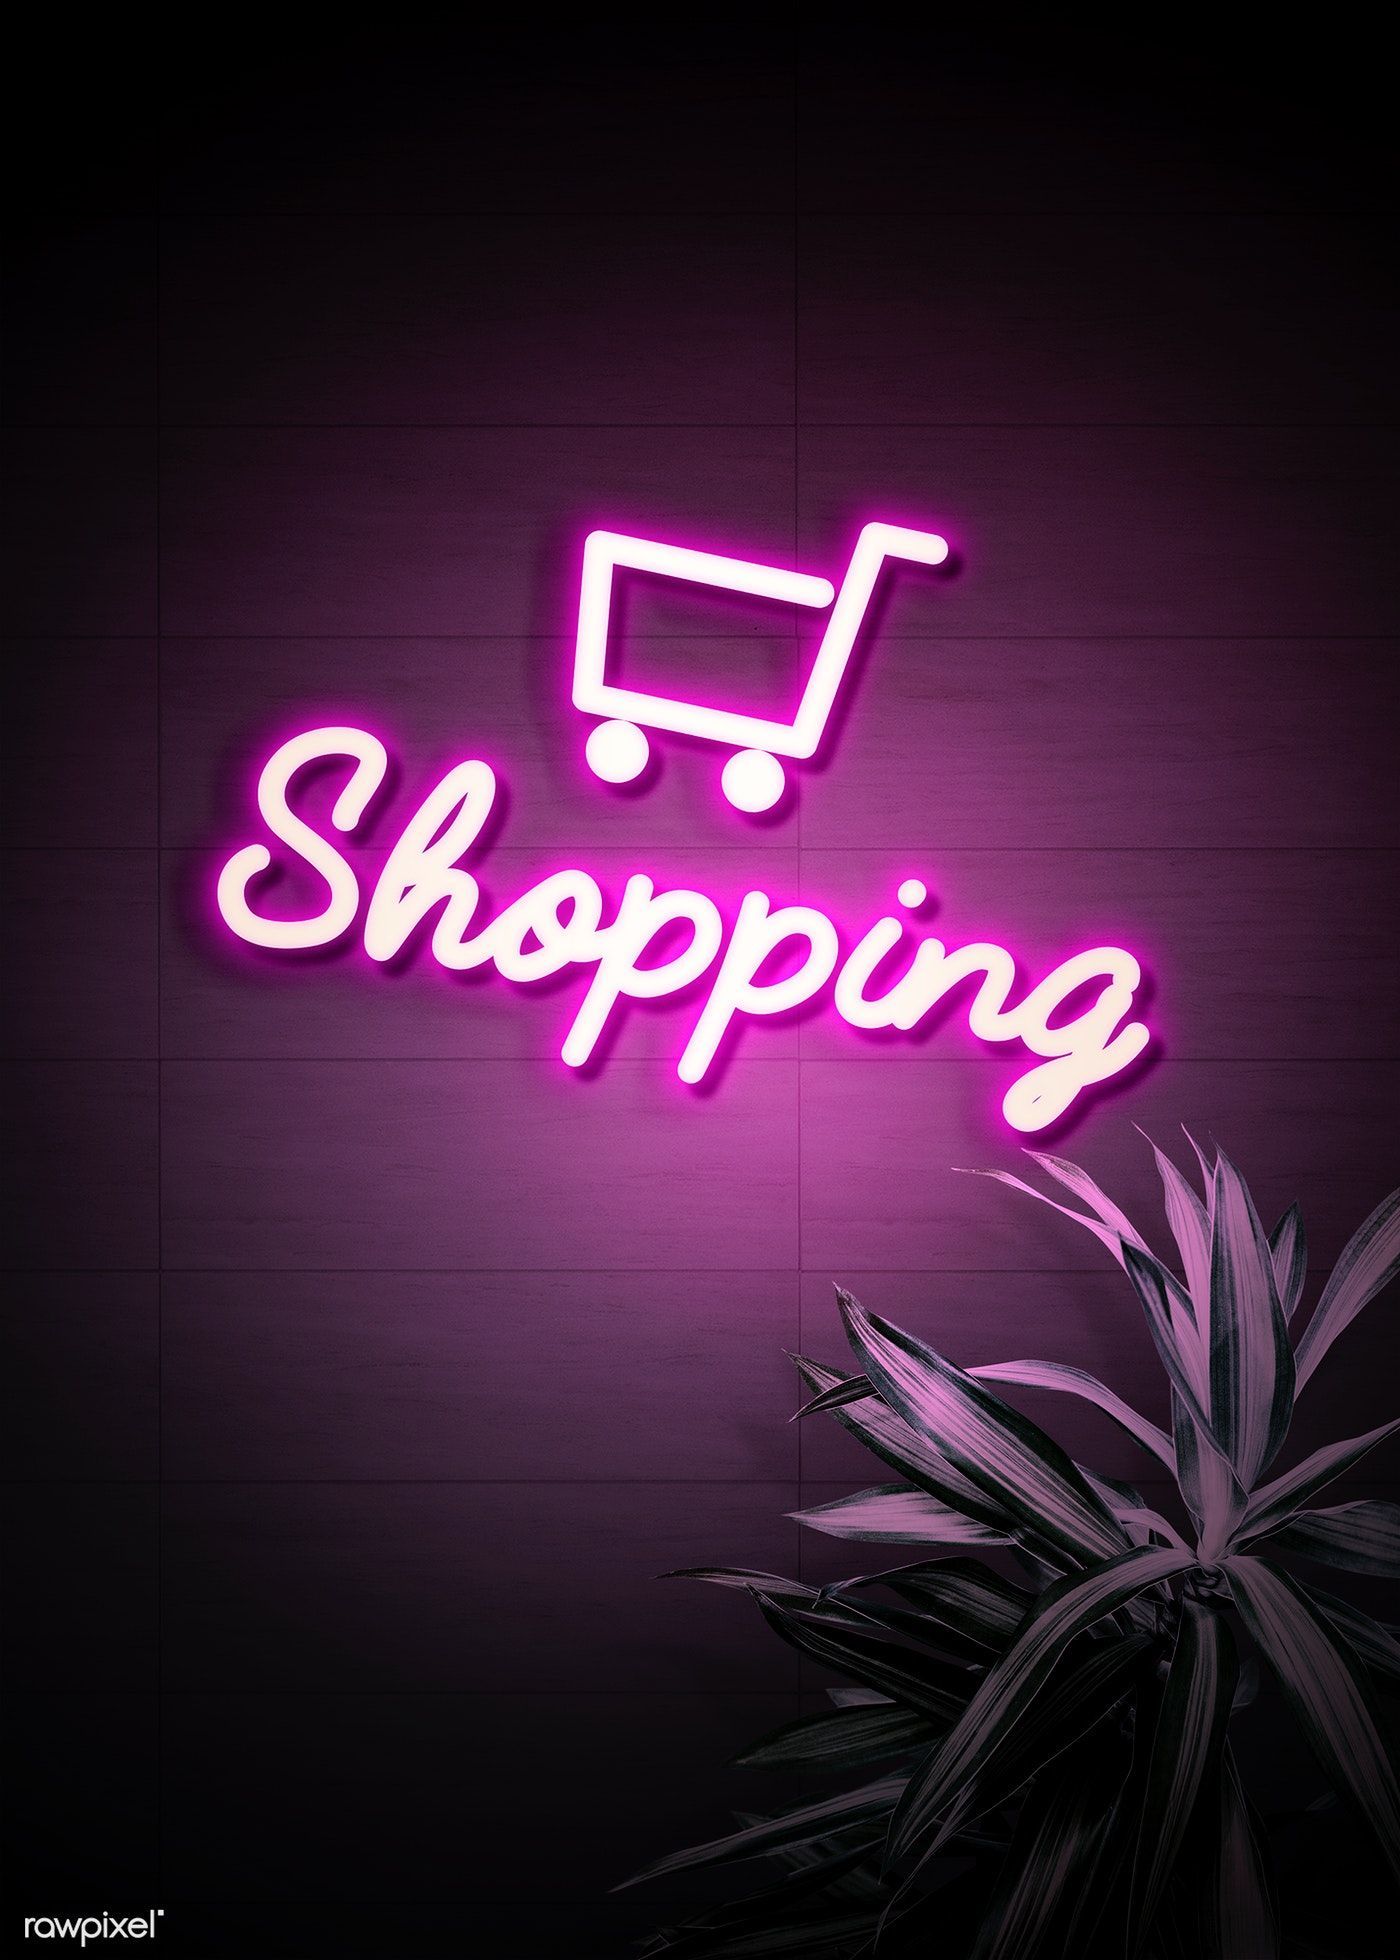 Download premium psd of Neon purple shopping cart on a wall 894347. Neon purple, Neon signs, Neon